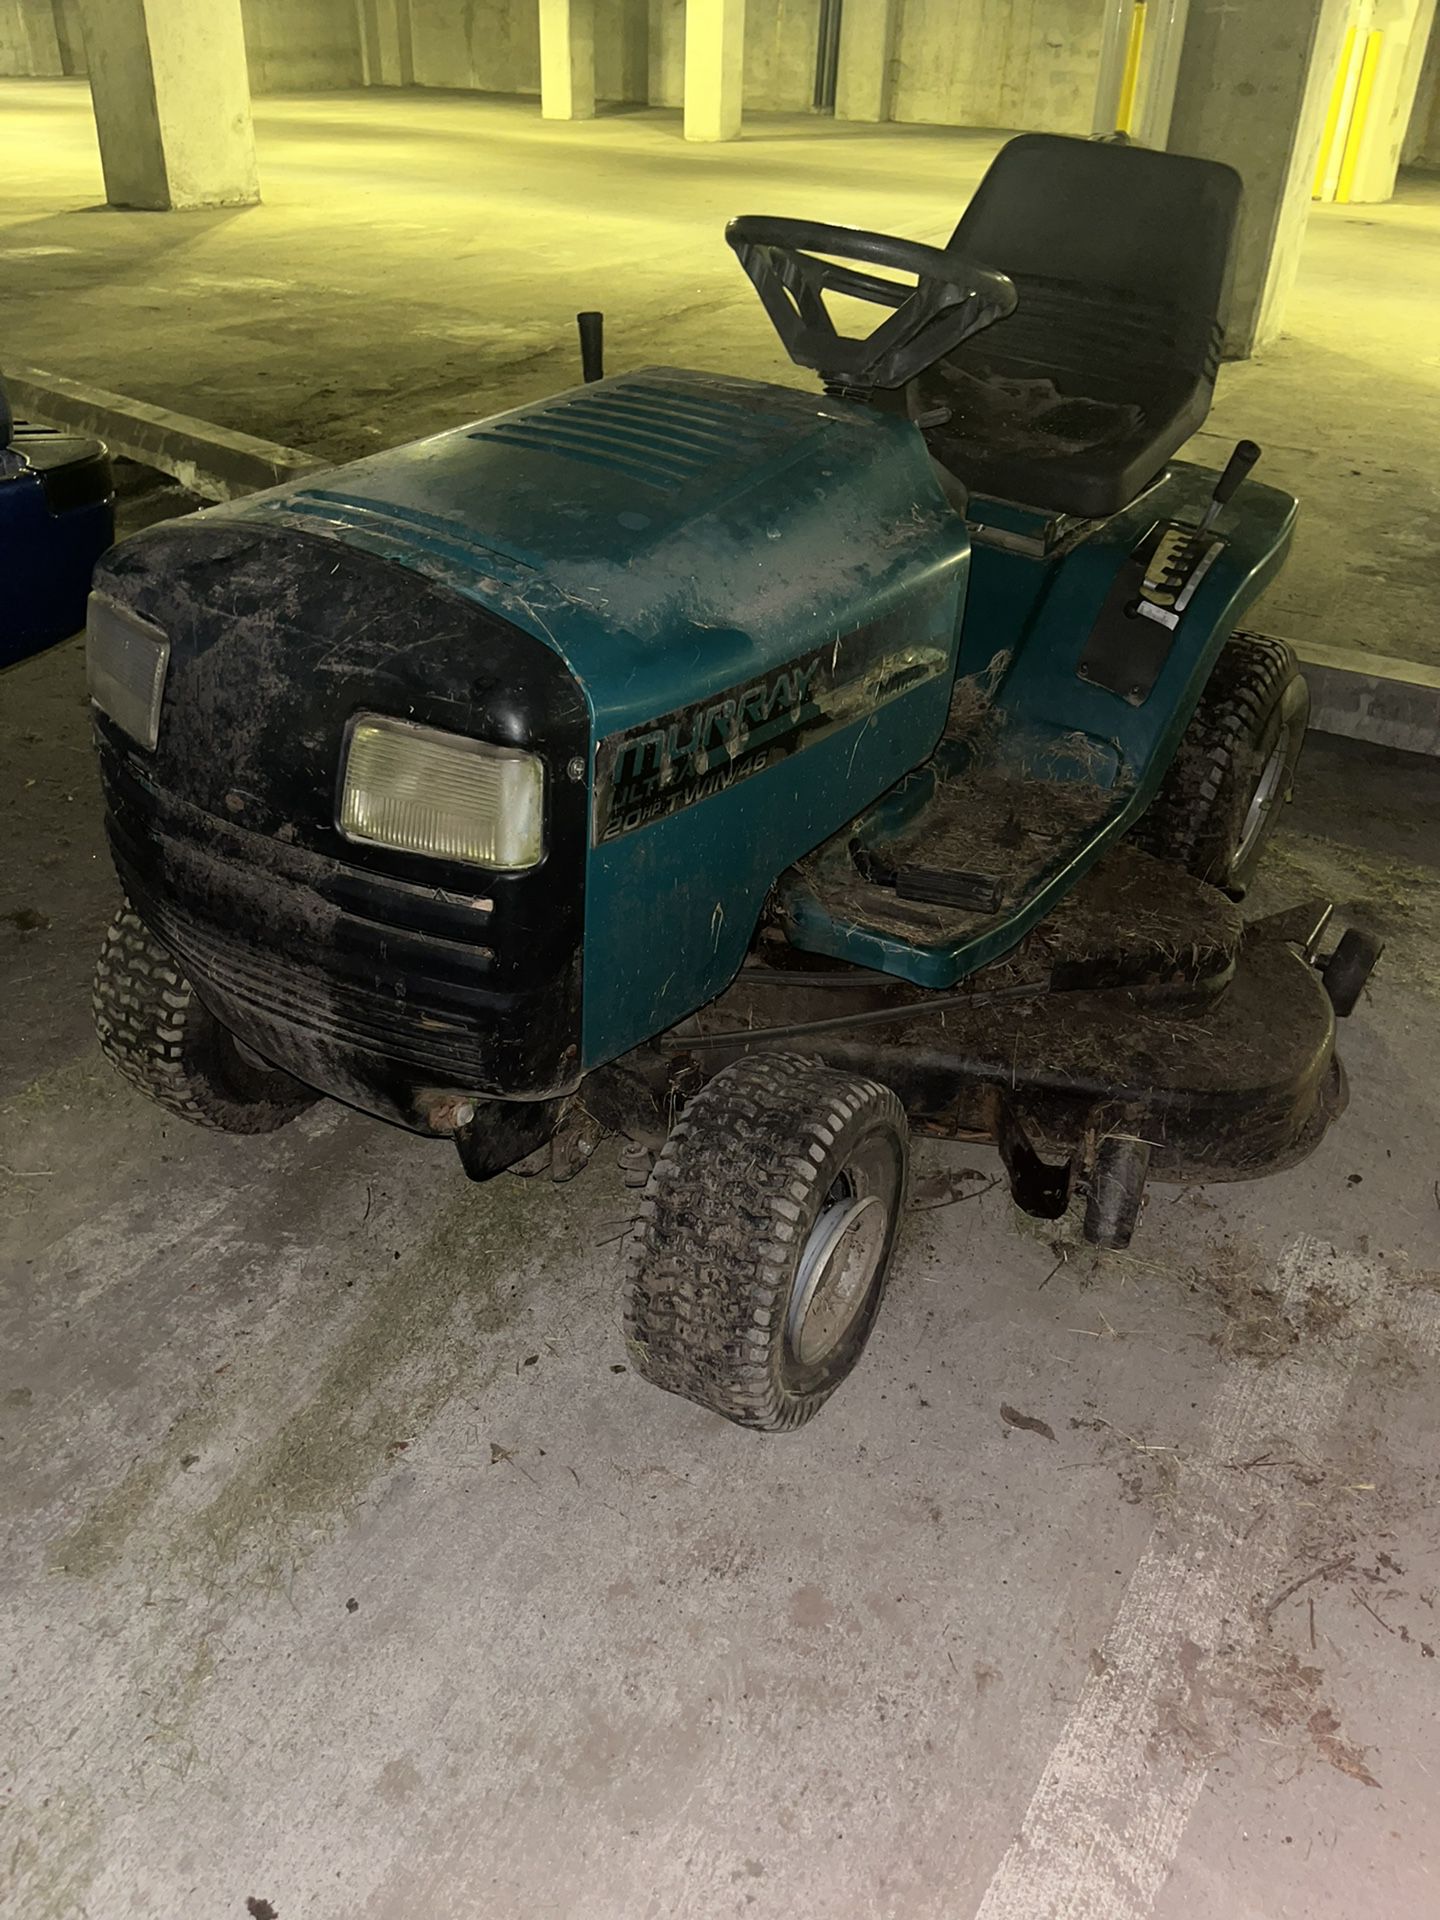 Murray Ultra Riding Mower Tractor NEEDS WORK. Worked fine when it was parked 2 years ago. Engine still spins by hand and feels like compression. 2 fla